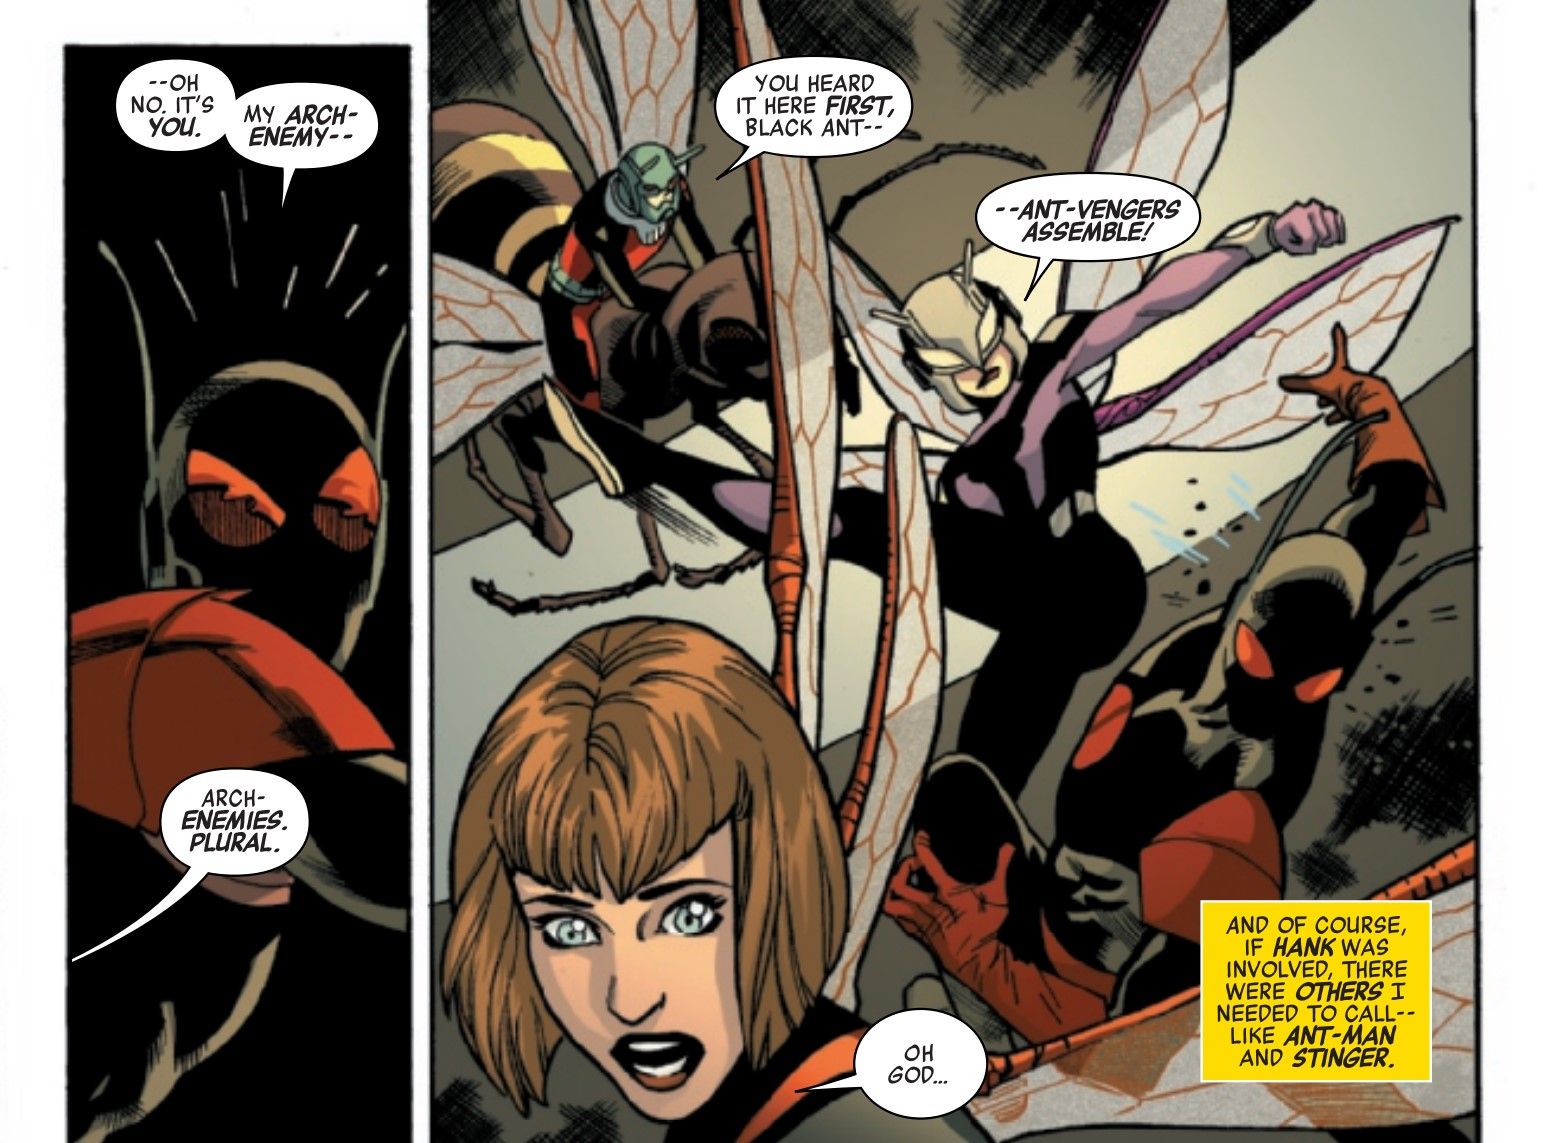 “Ant-Vengers Assemble”: Marvel Debuts the Most Creative Avengers Line-Up in Years